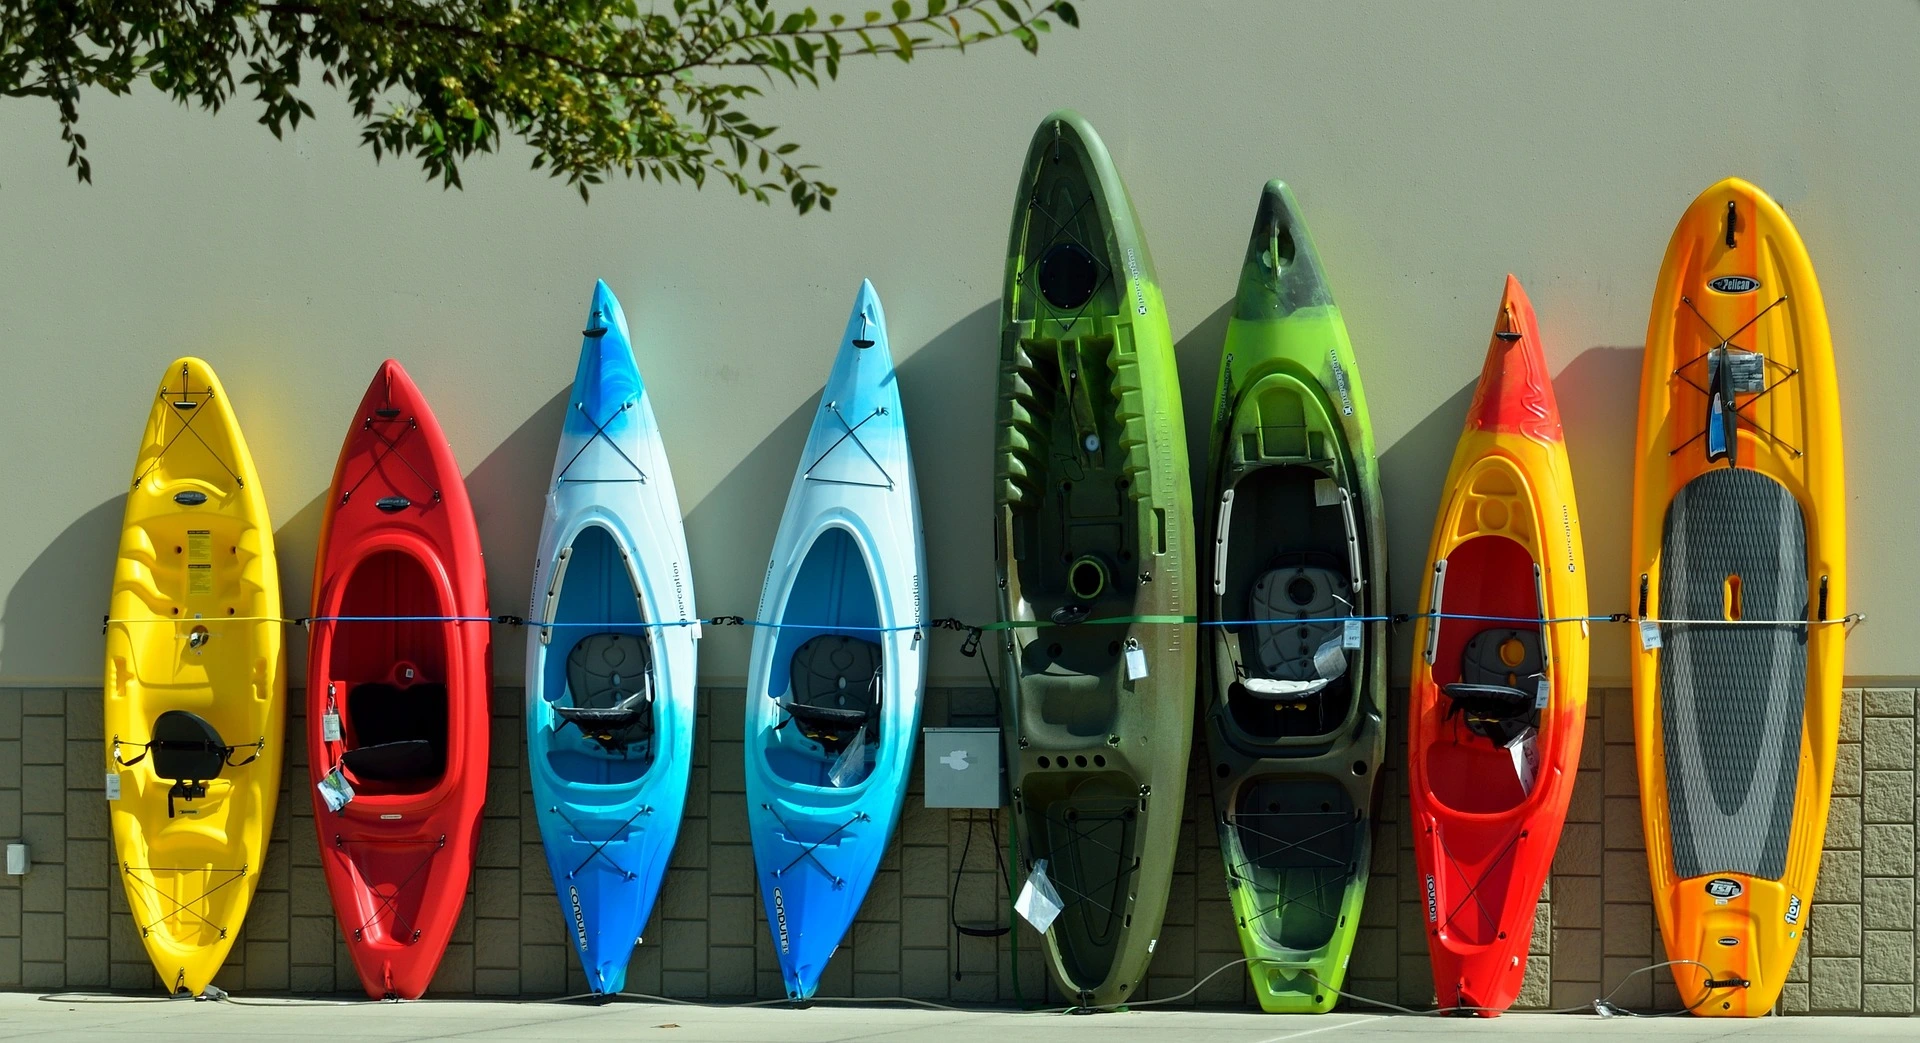 how to store kayaks in garage